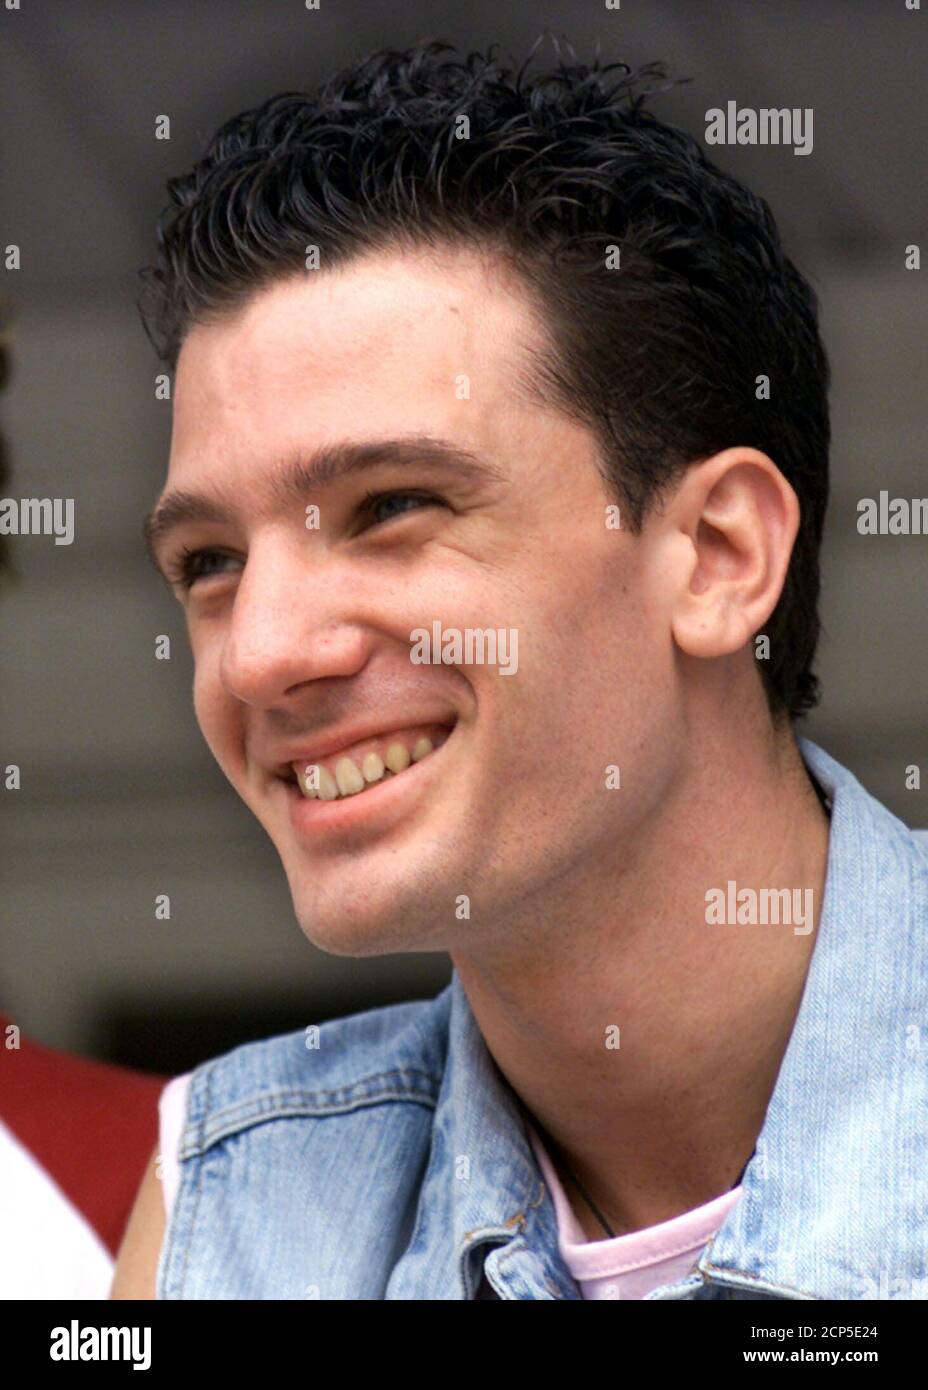 JC Chasez, a member of the pop group 'N'Sync,' is shown at the Ronald McDonald House in Orlando, Florida August 16, 2000. The Ronald McDonald house serves as a home-away-from-home for families of critically ill children being treated at nearby medical centers.  JOE SKIPPER Stock Photo